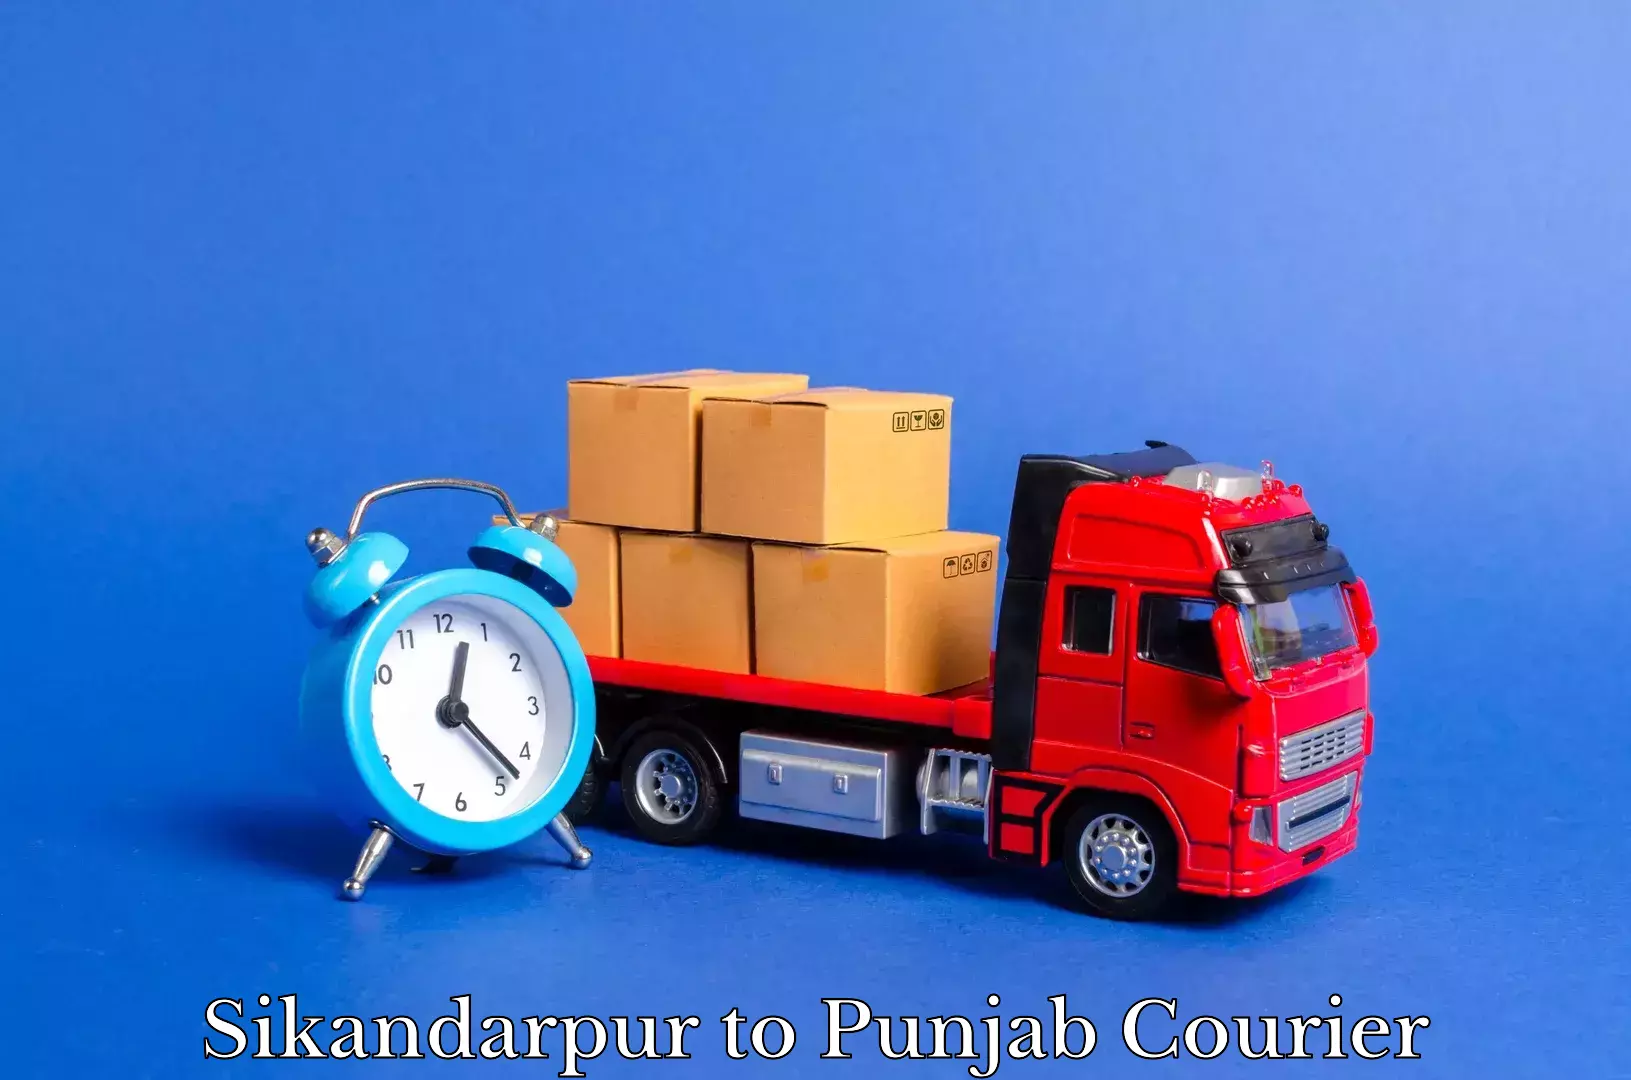 Door-to-door relocation services in Sikandarpur to Malout